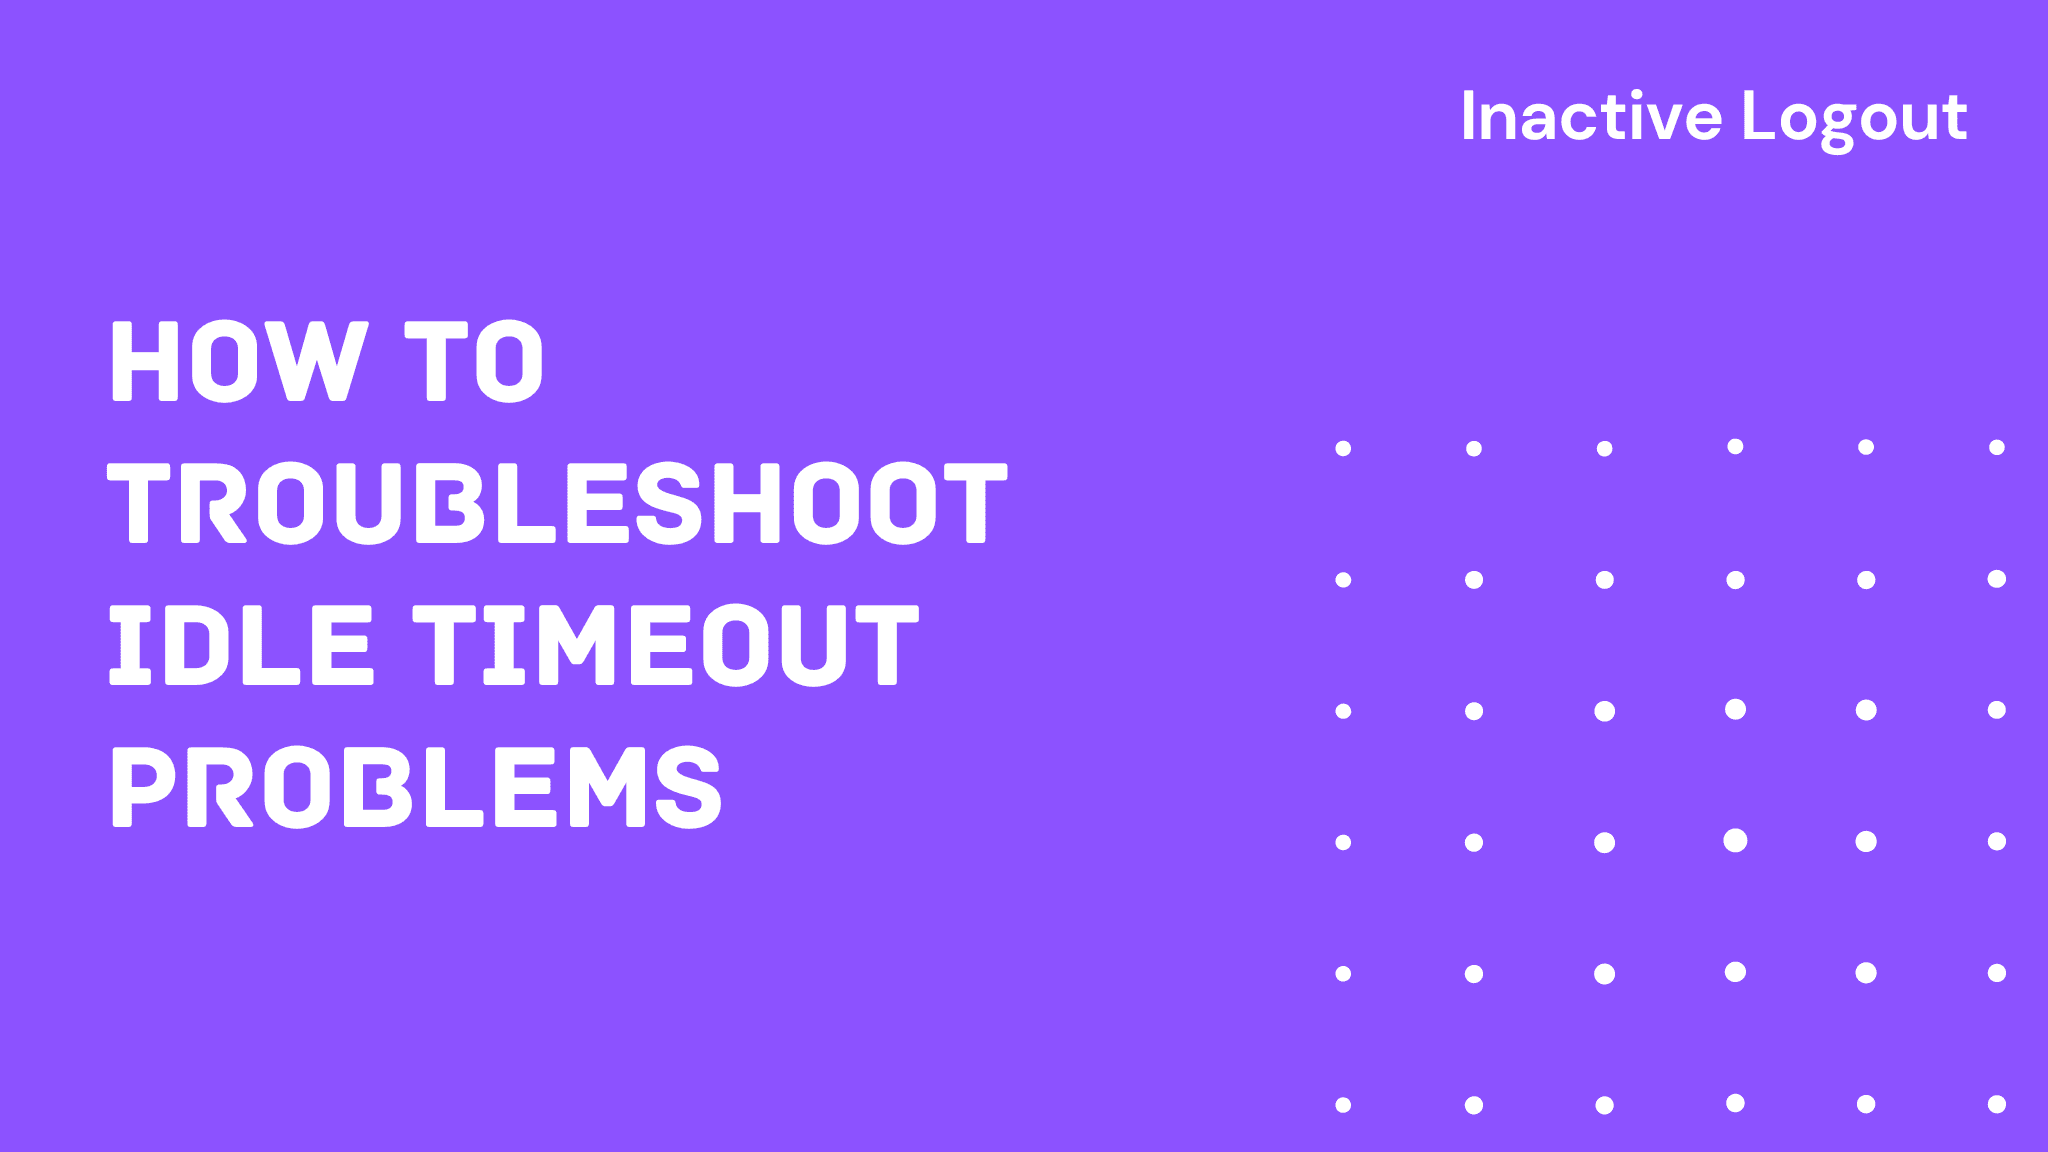 How to Troubleshoot Idle Timeout Problems